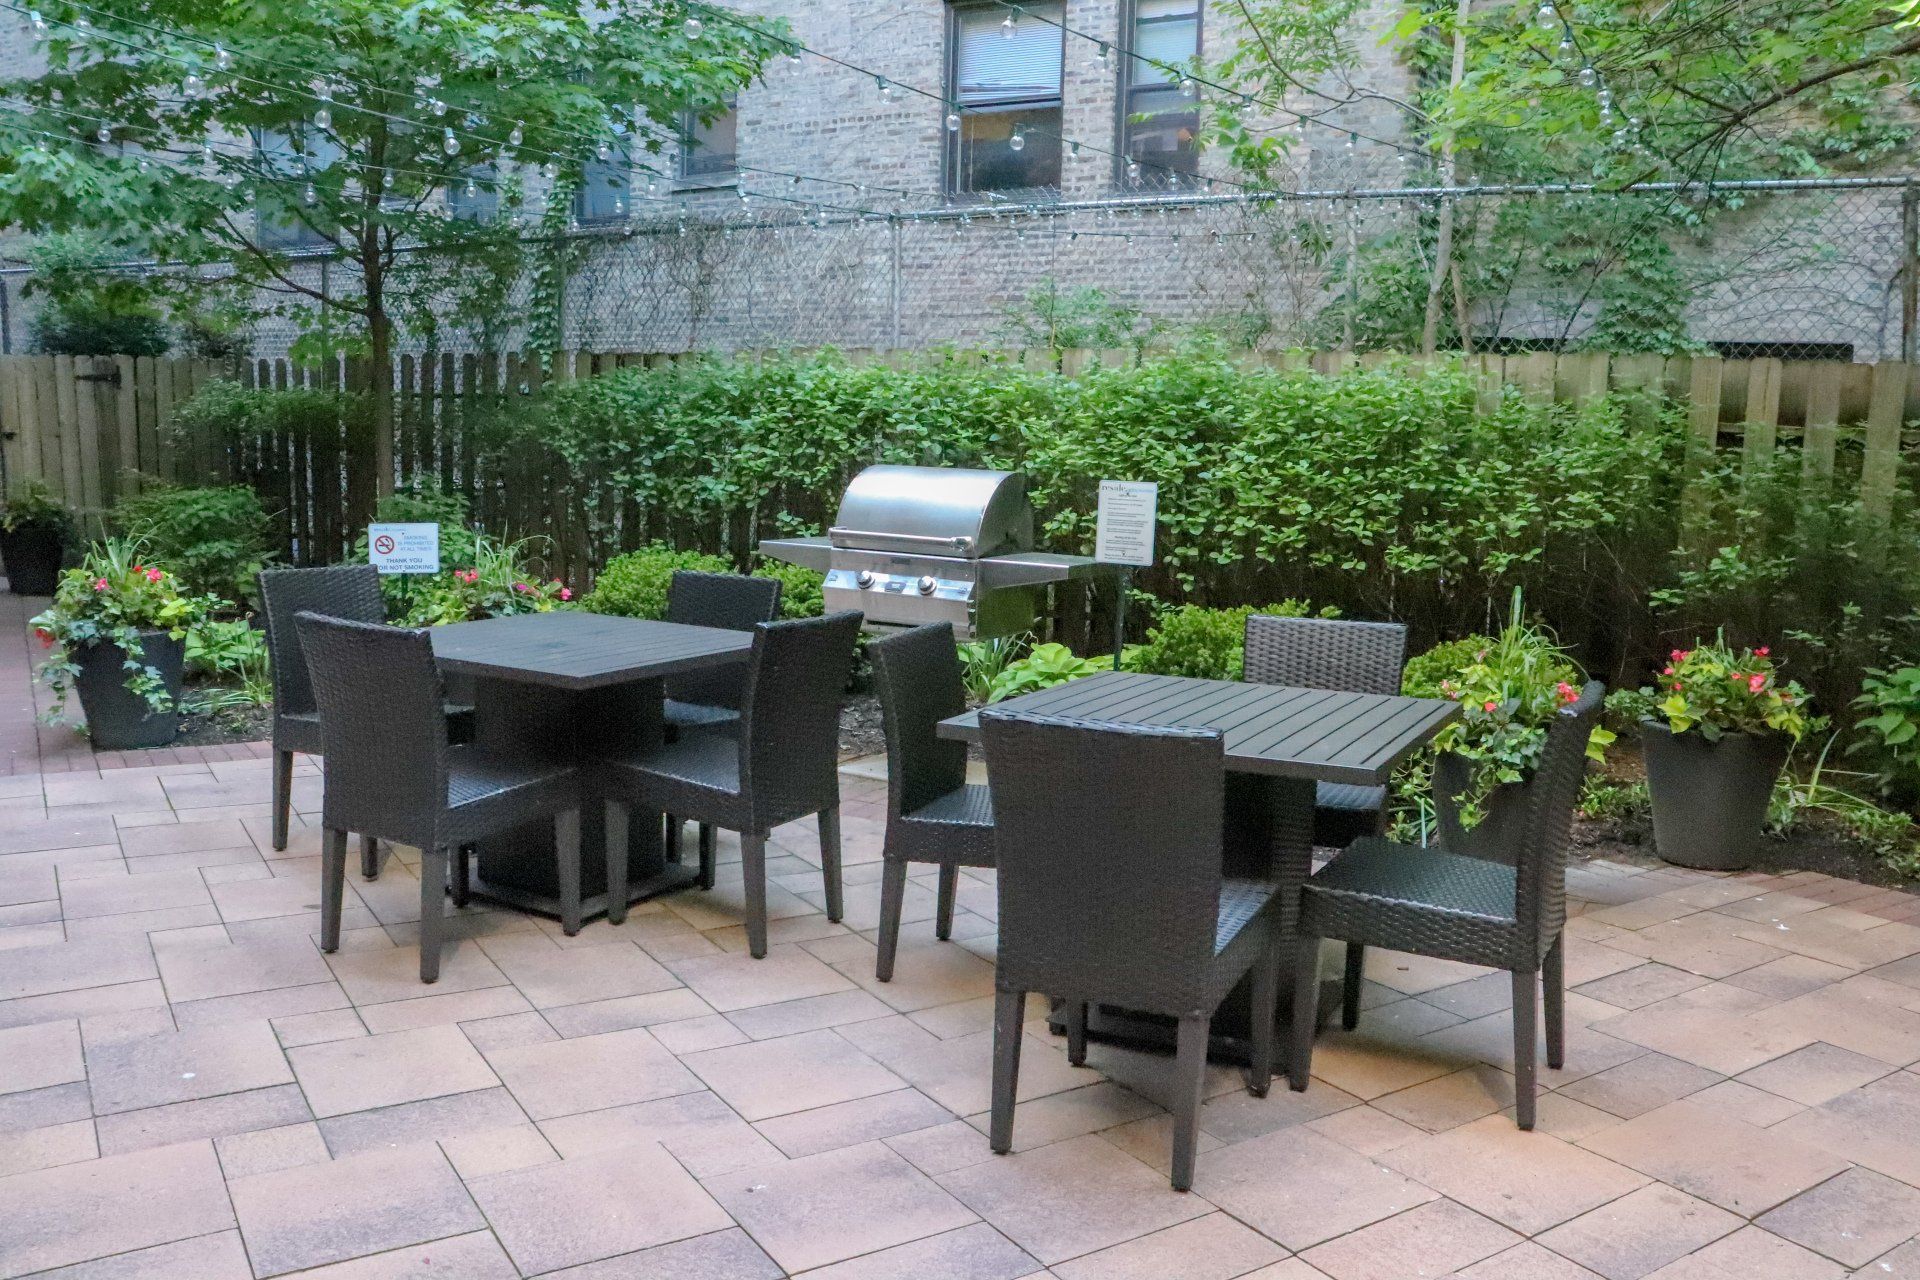 Apartment outdoor patio with tables and chairs and a grill at Reside at 849.